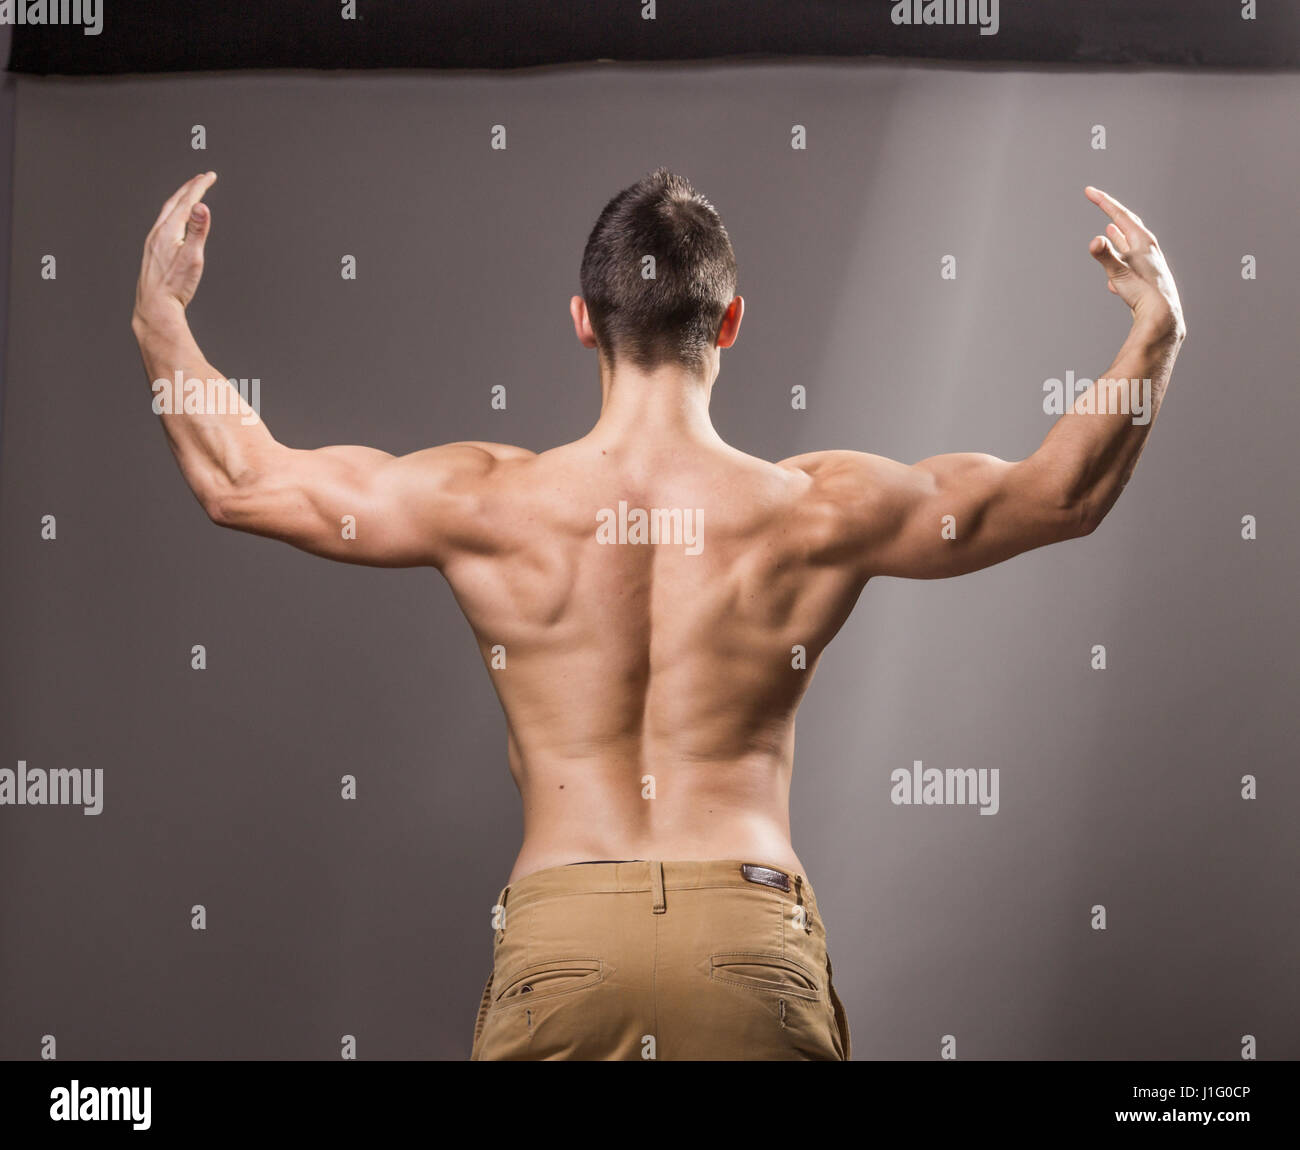 Rear View Of Healthy Muscular Young Man With His Arms Stretched